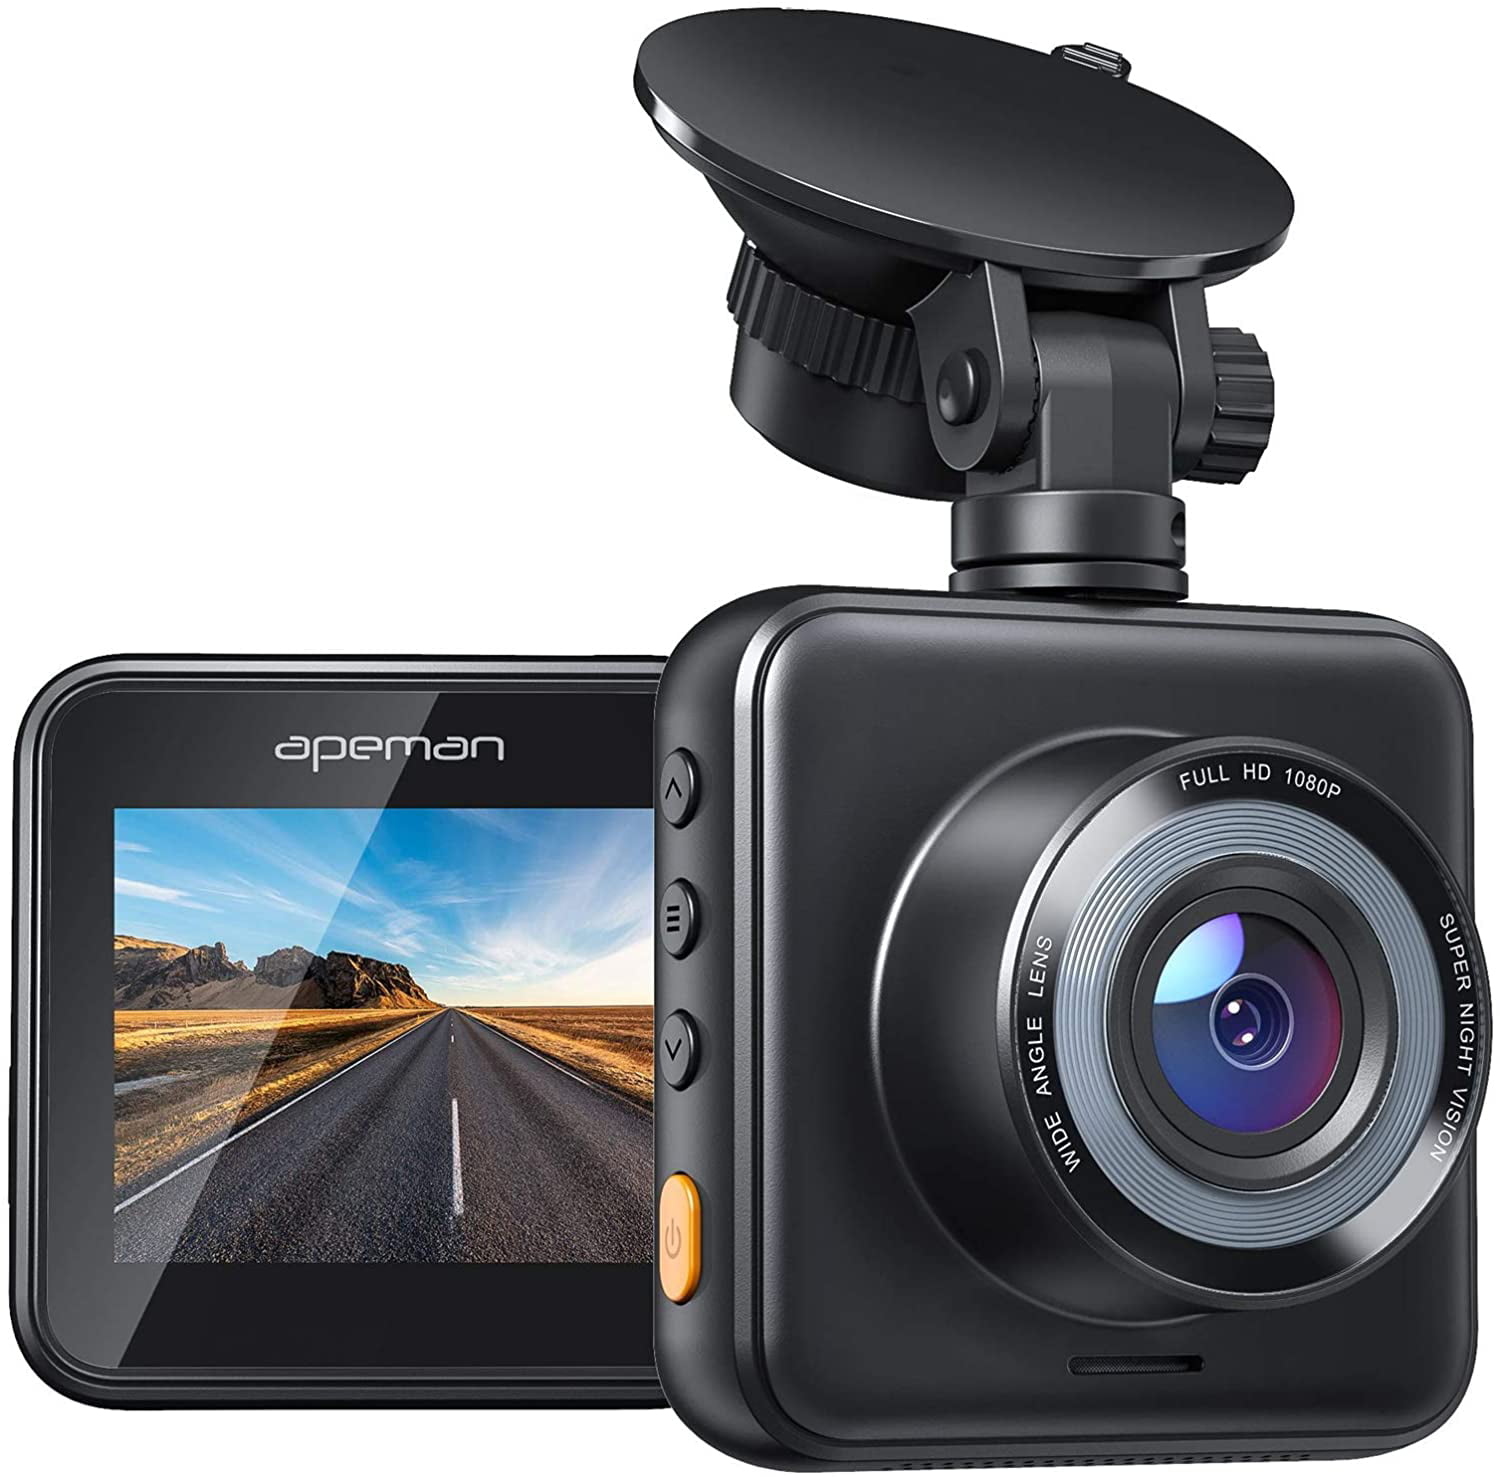 APEMAN Dash Camera for Cars 1080P Mini Dash Cam Car Security Camera with Night Vision, 170° Wide Angle, Motion Detection, Parking Monitoring, G-Sensor, Loop Recording, Support Micro 128GB Max, Black